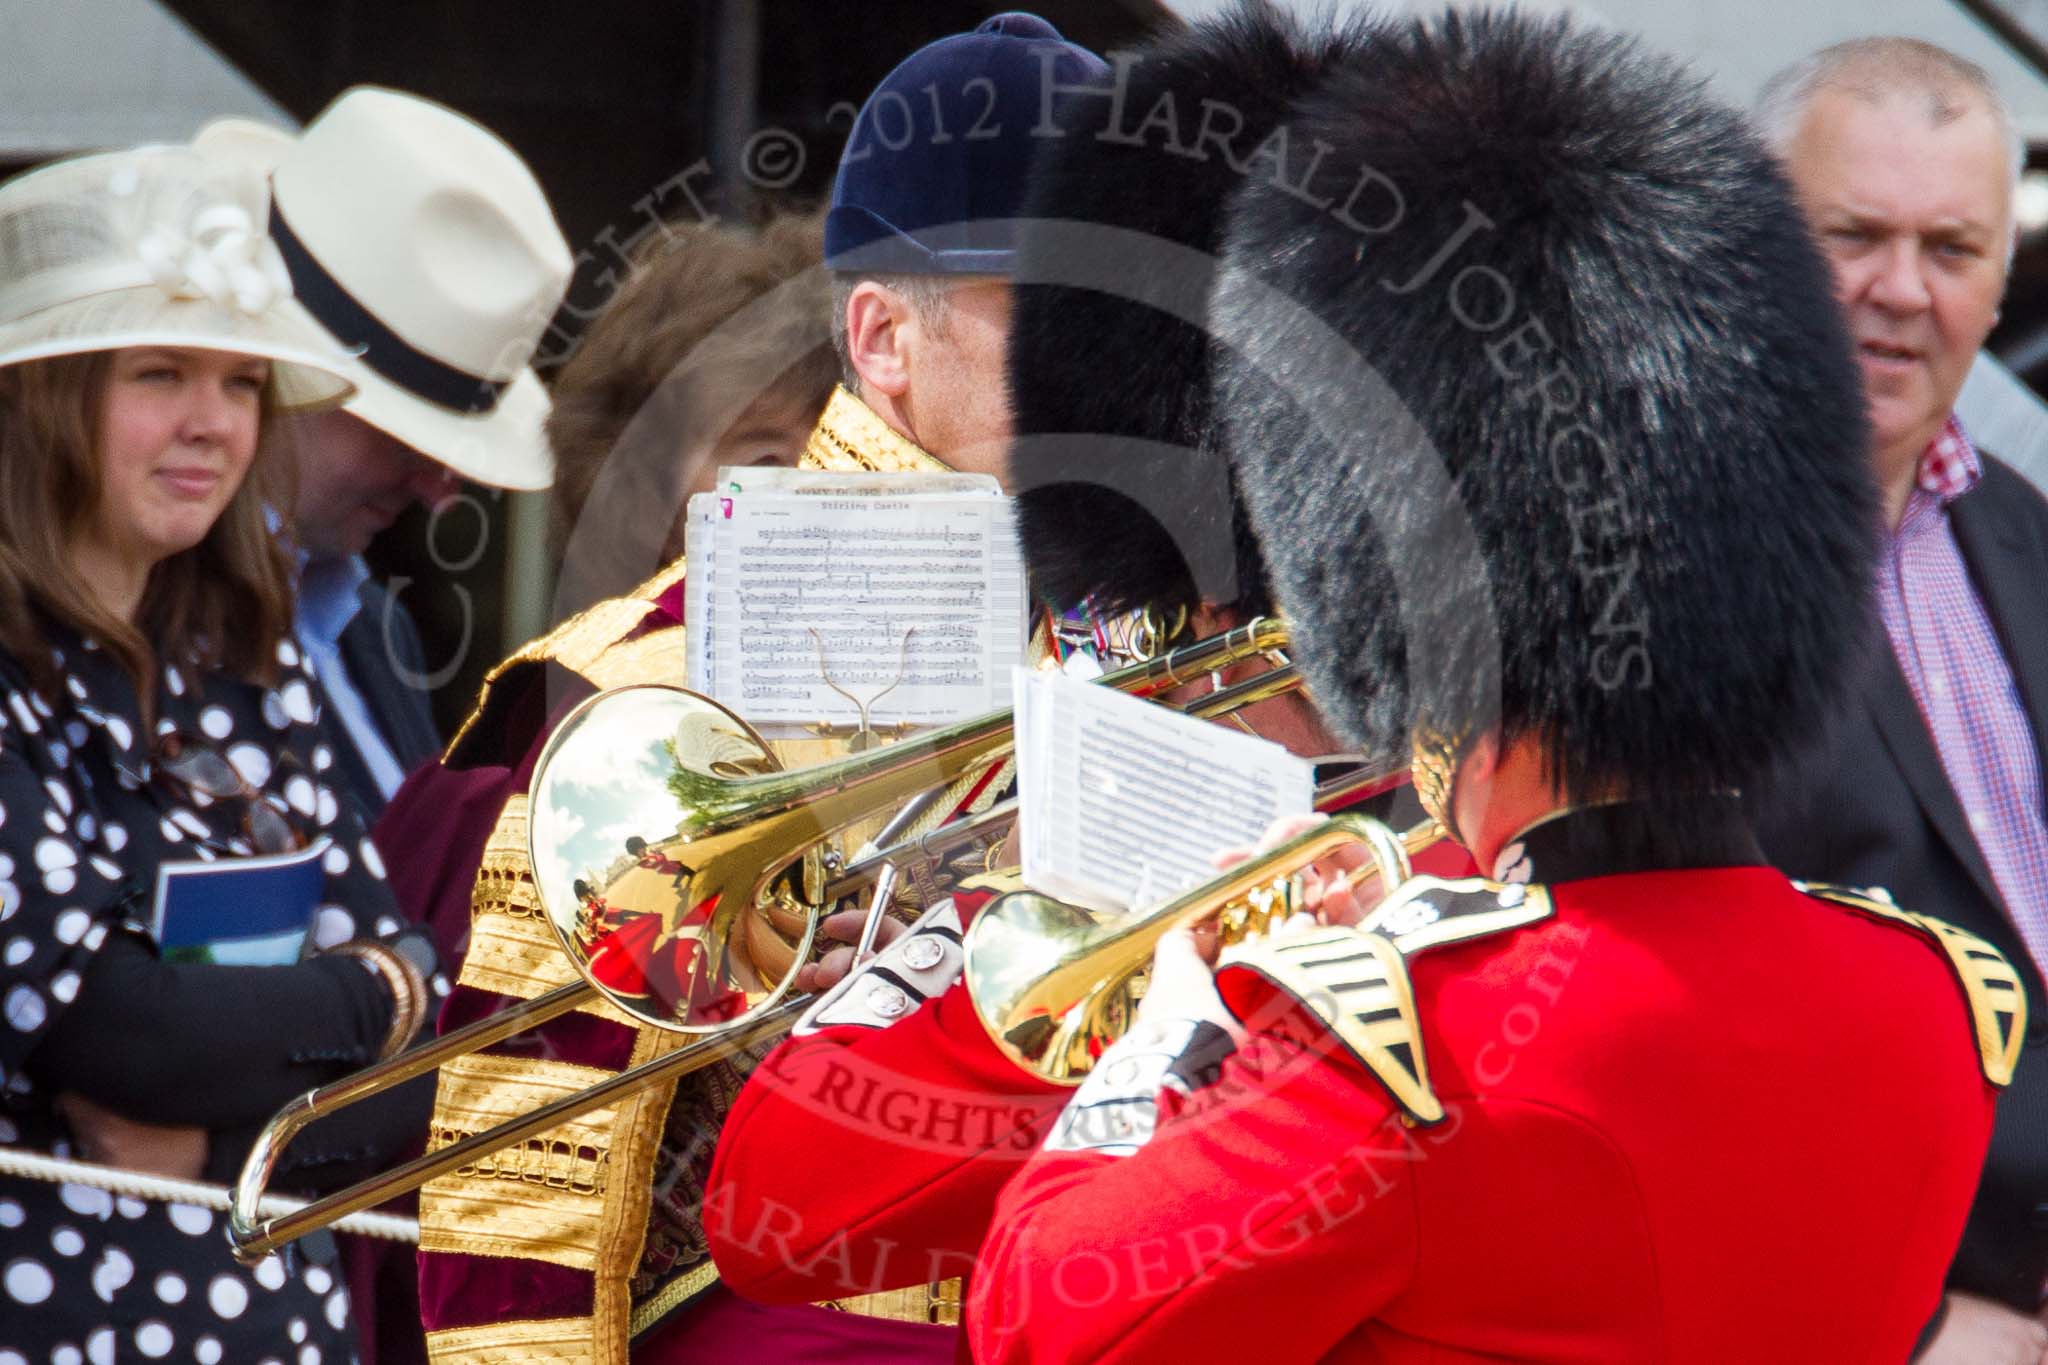 Trooping the Colour 2012: Lots of detail in the reflection of the Band of the Scots Guards seen o the instrument..
Horse Guards Parade, Westminster,
London SW1,

United Kingdom,
on 16 June 2012 at 10:18, image #37